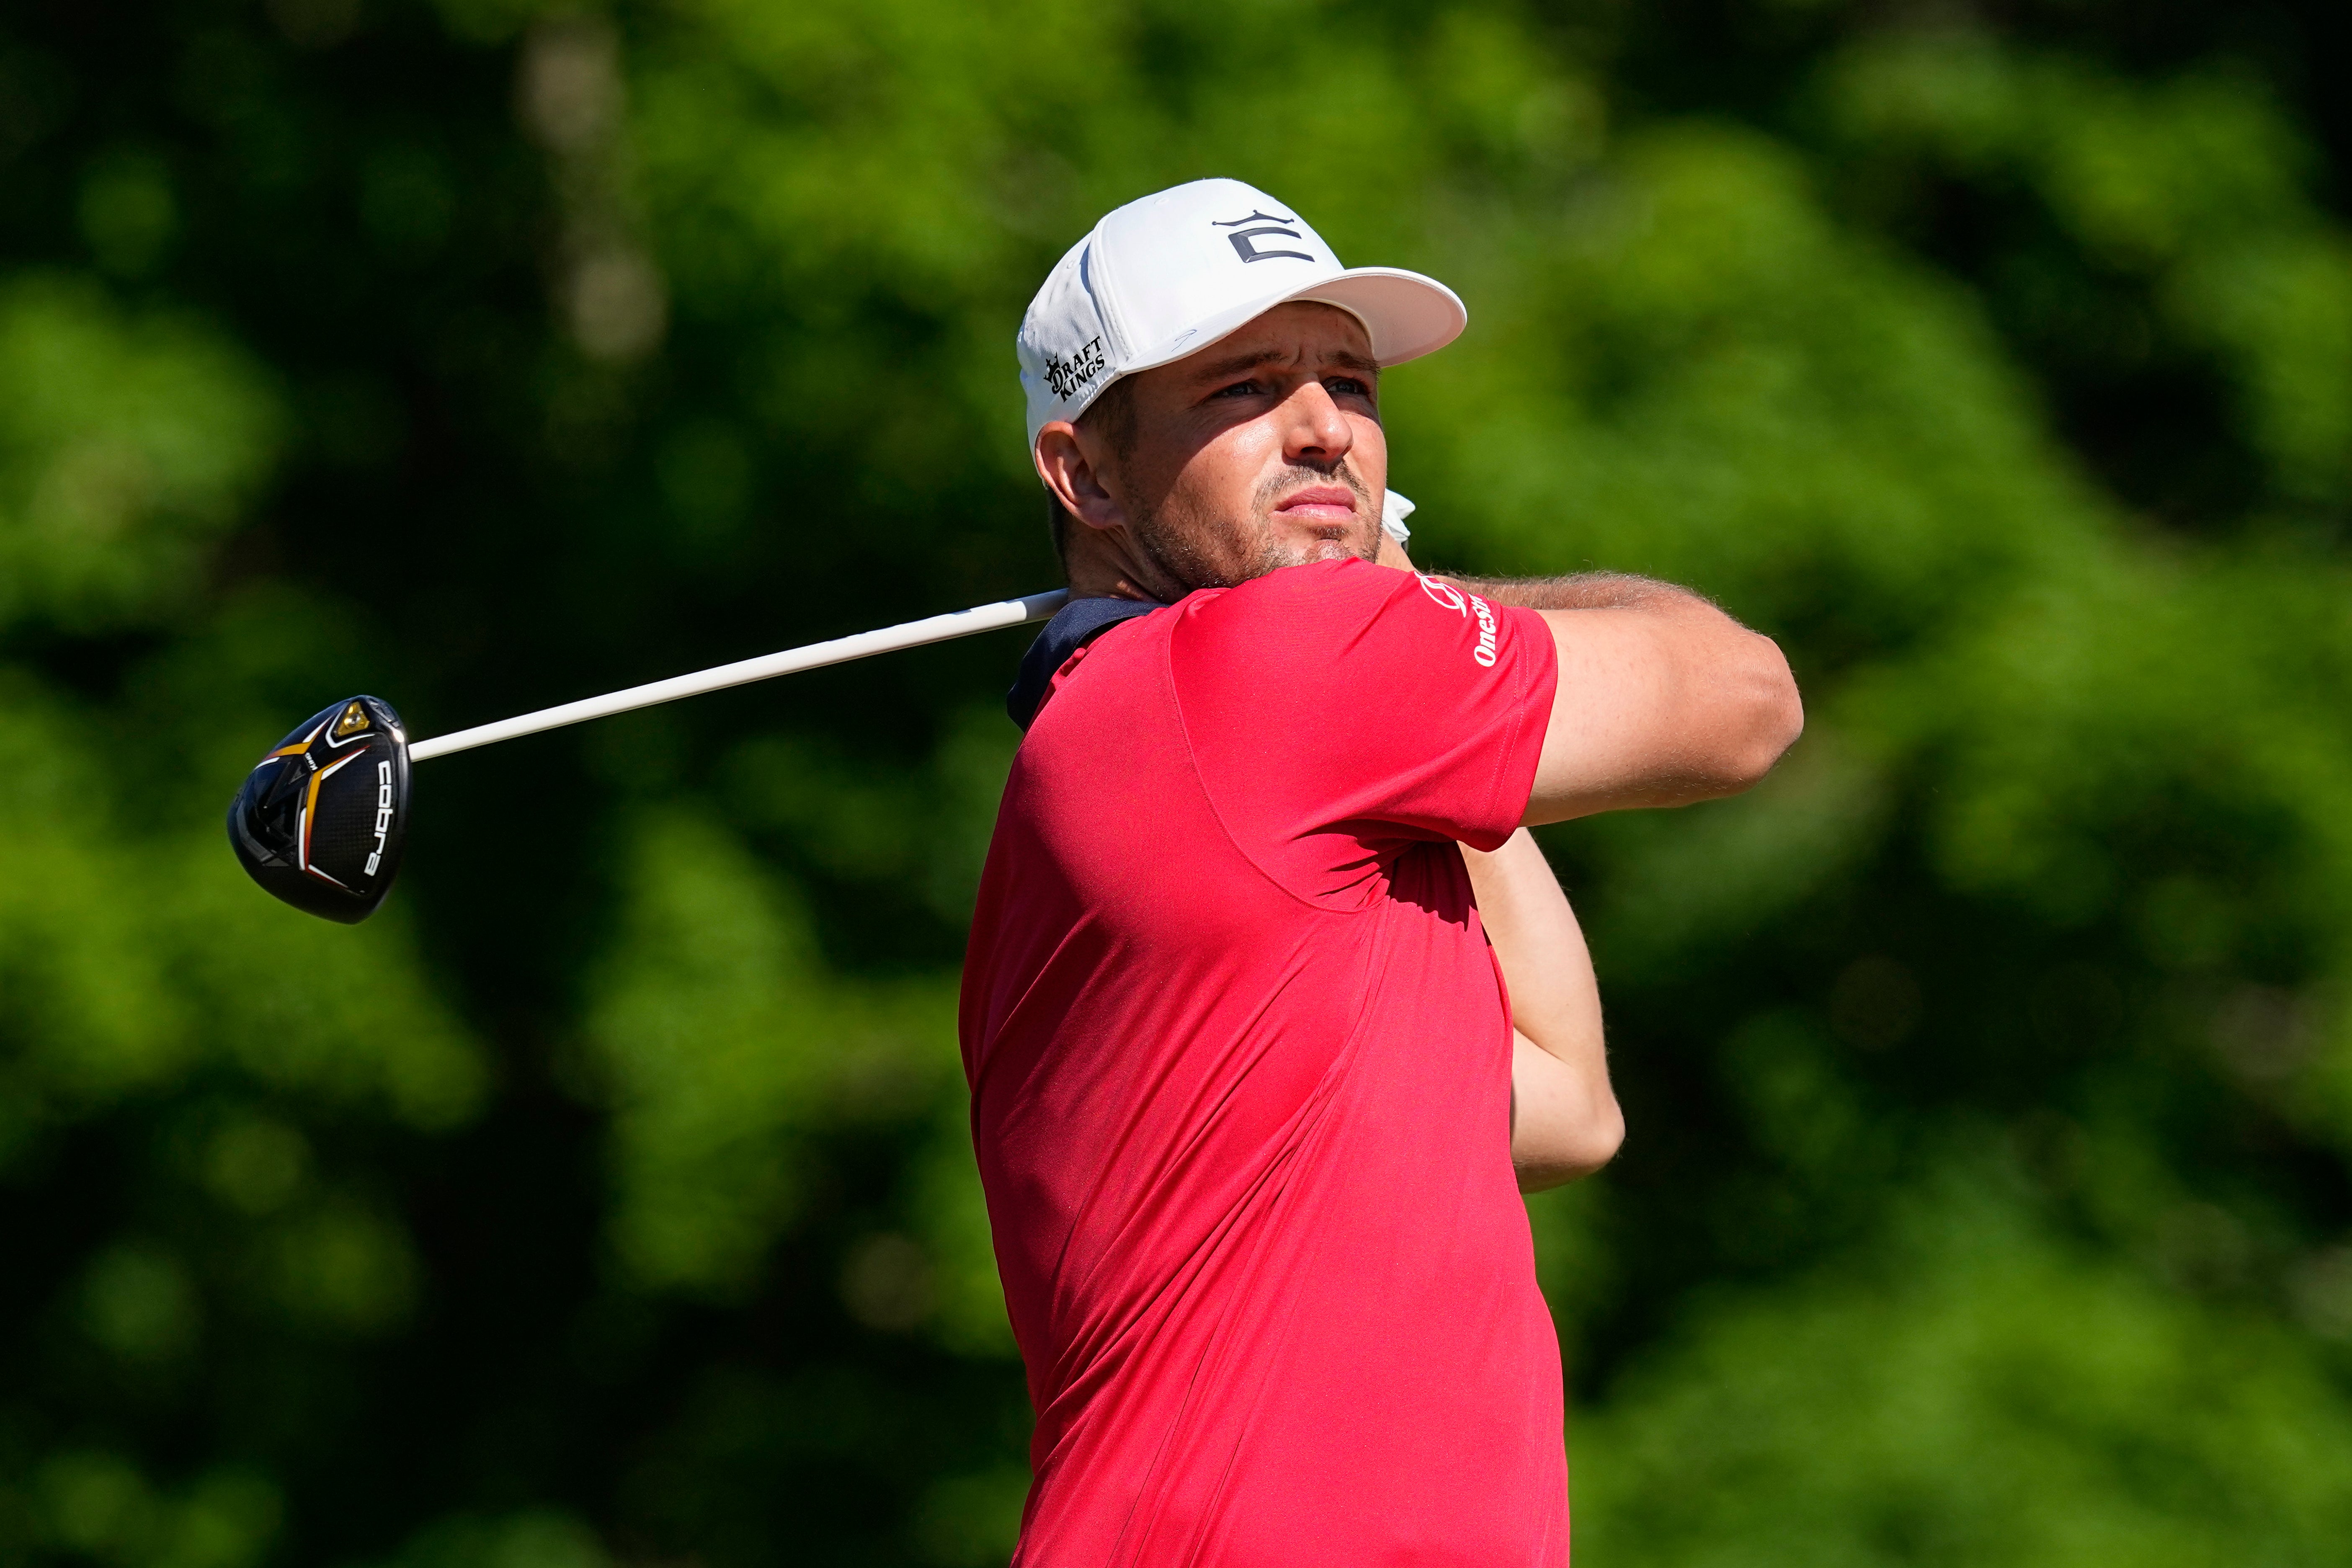 DeChambeau confirmed as latest signing for Saudi golf series The